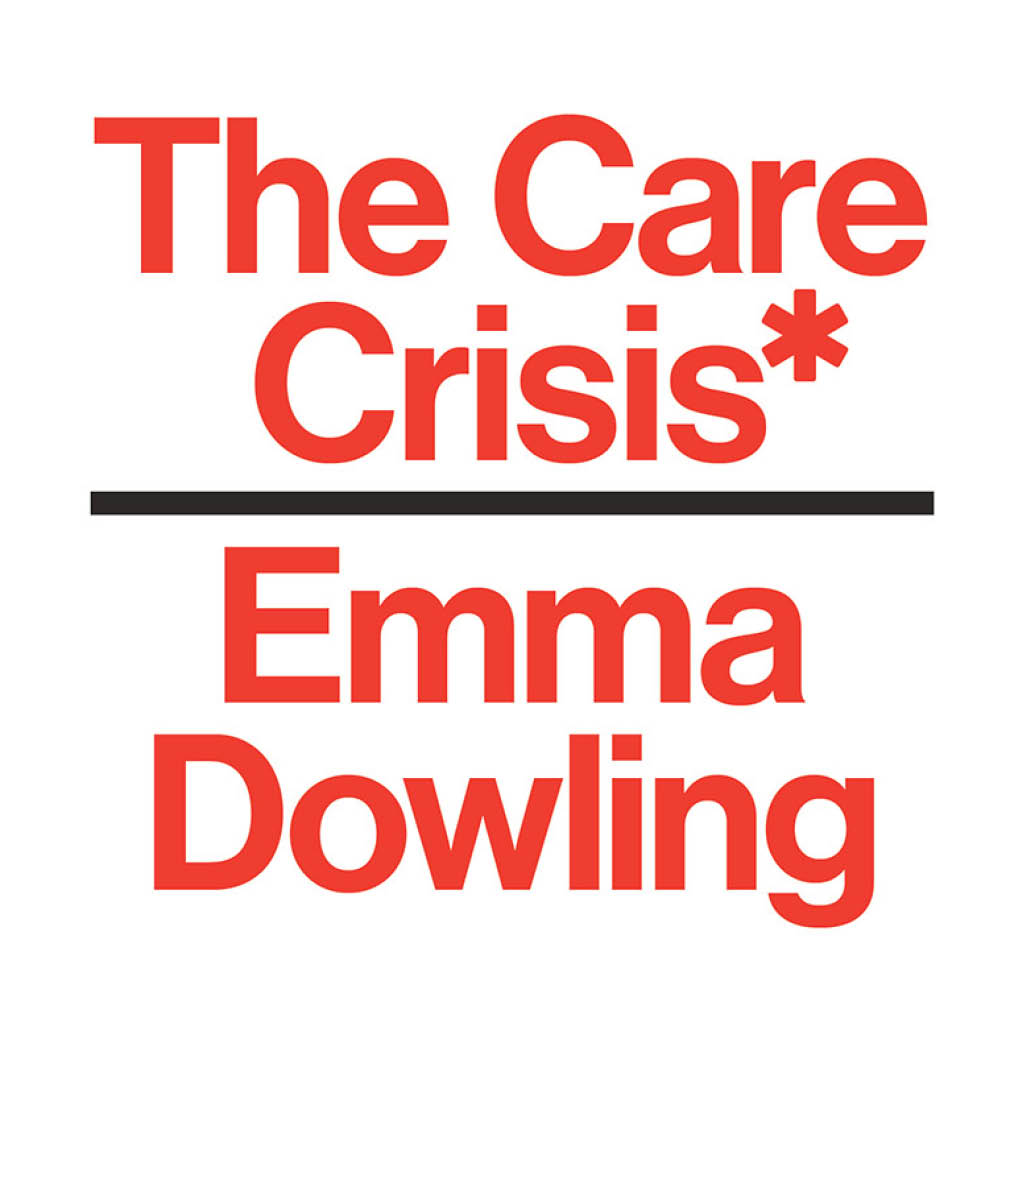 The Care Crisis: What Caused It and How Can We End It by Emma Dowling